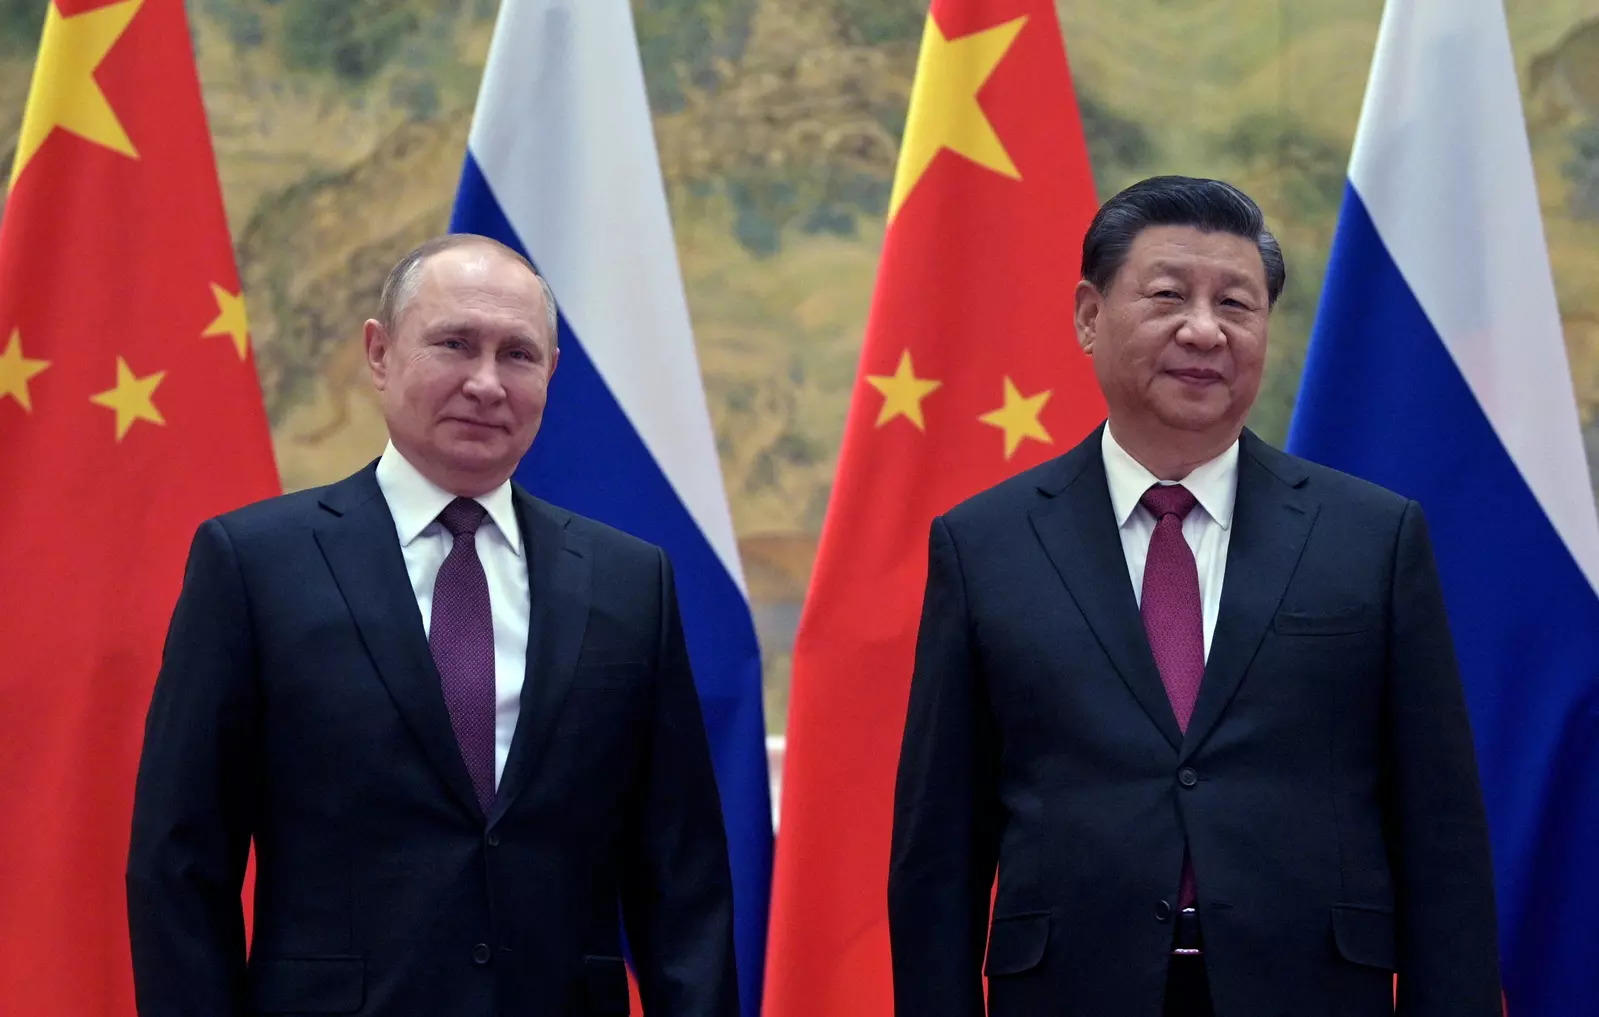 File photo: Russian President Vladimir Putin attends a meeting with Chinese President Xi Jinping in Beijing.